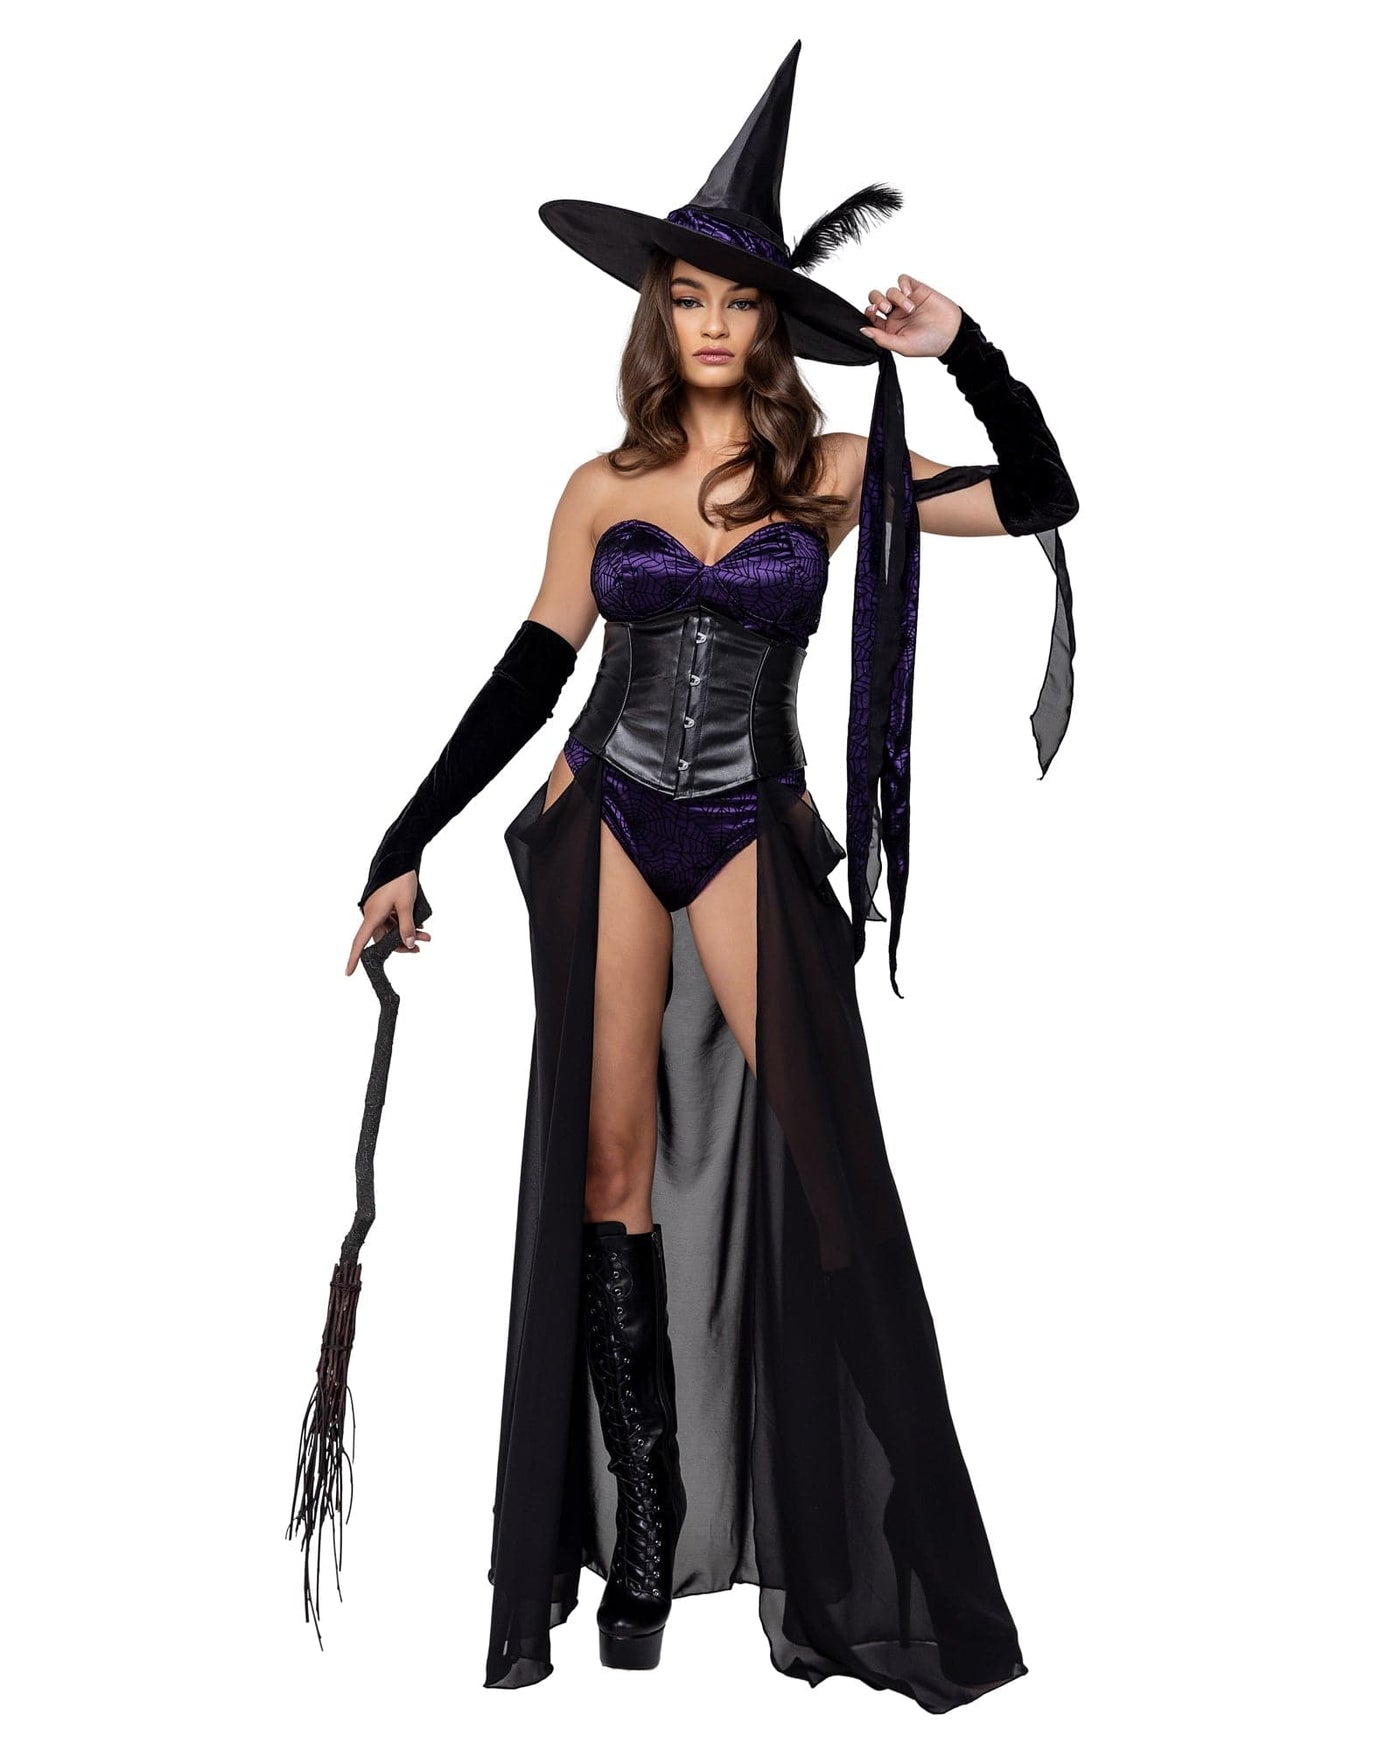 3pc. Dark Spell Seductress Witch Women's Costume - For Love of Lingerie